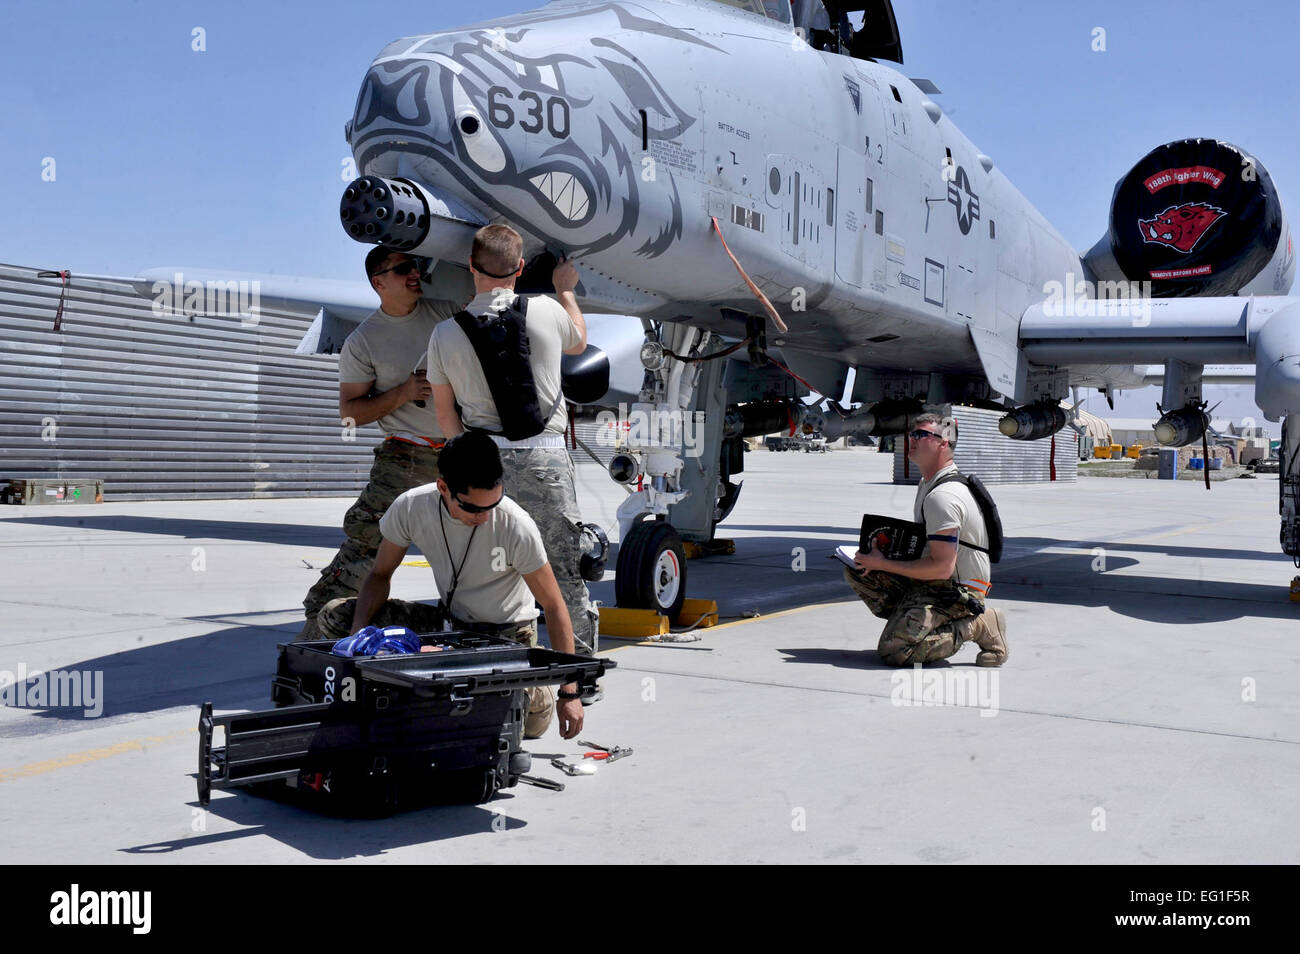 A 455th Expeditionary Aircraft Maintenance Squadron crew repairs an A-10 Thunderbolt II Aprill 6, 2012, at Bagram Airfield, Afghanistan. The 455th EAMXS is responsible for repairing and maintaining military aircraft at Bagram Airfield as well as performing preventative maintenance inspections.  Airman 1st Class Ericka Engblom Stock Photo